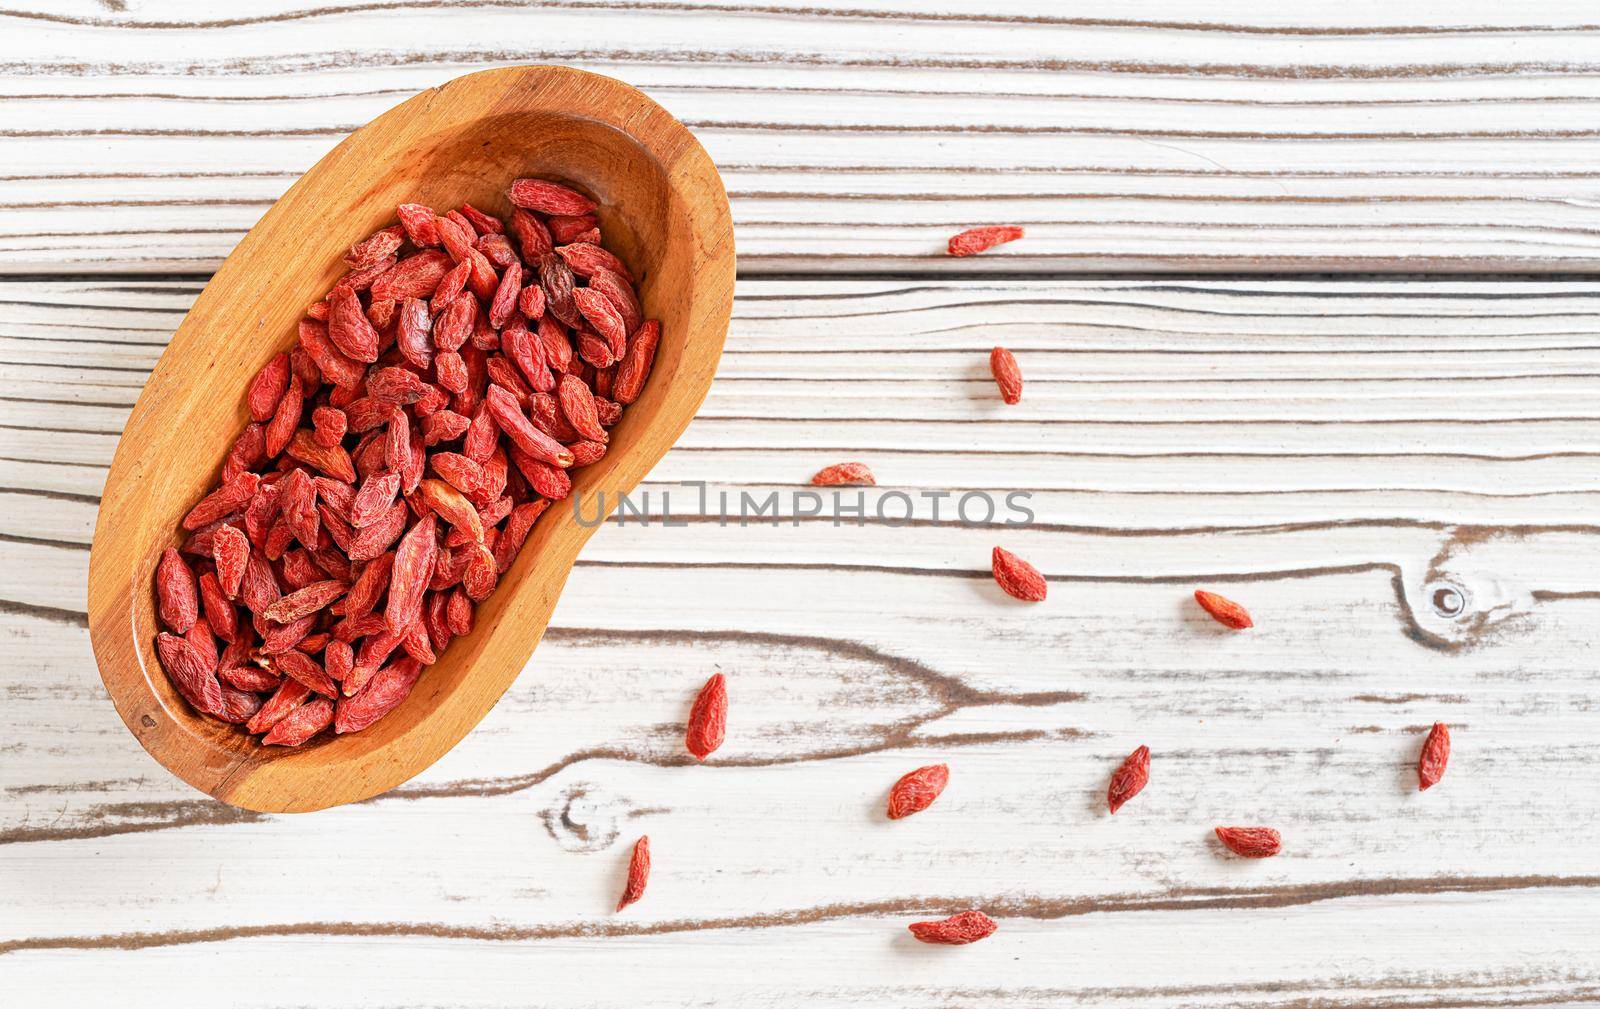 Dried goji aka. wolfberry seeds in wooden bowl and spilled on white boards desk near.